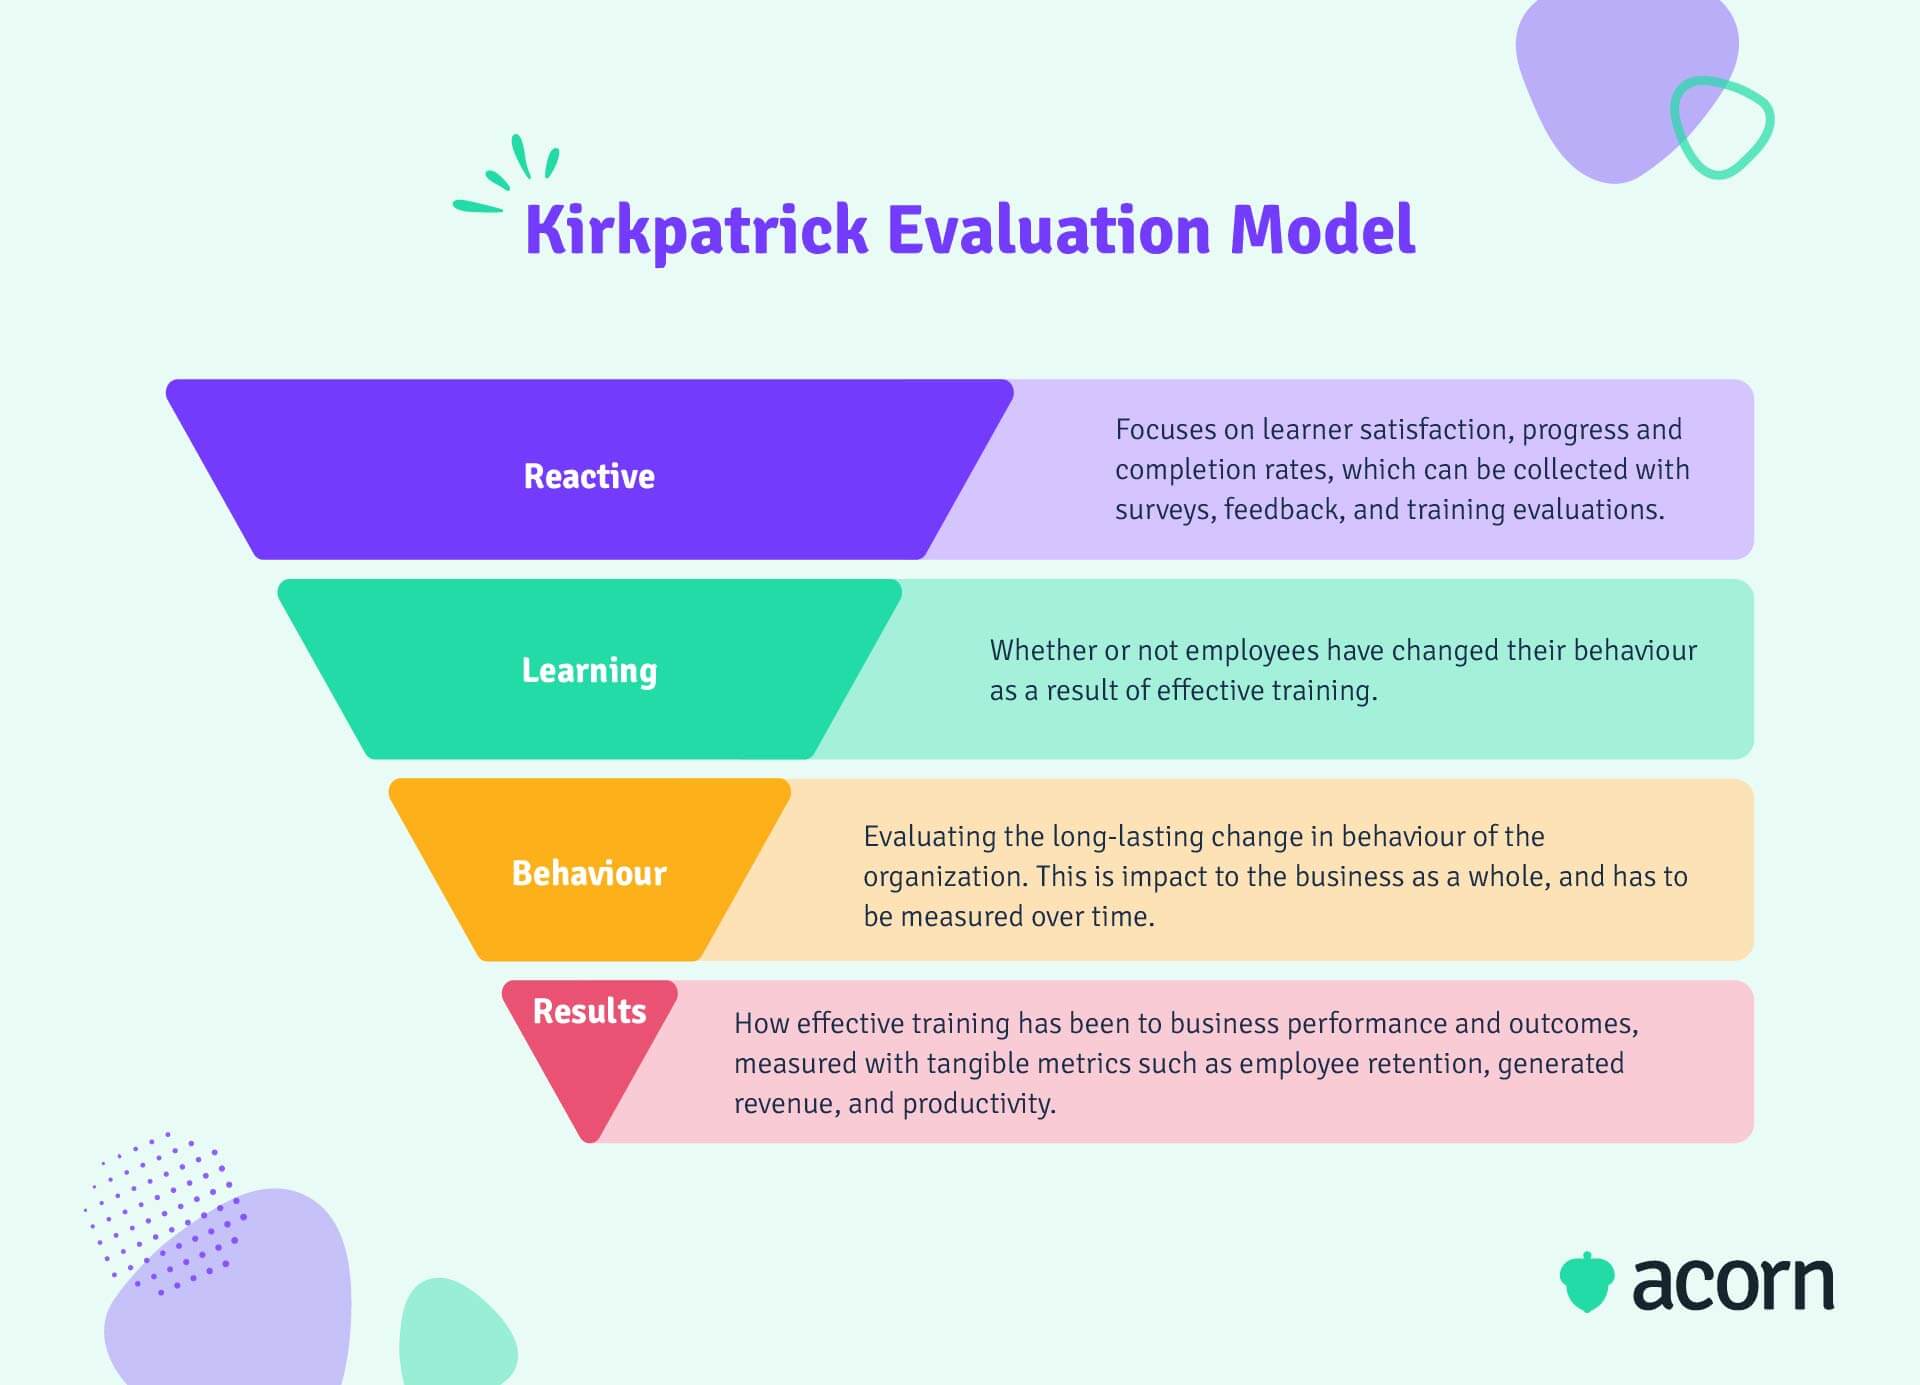 The 4 levels of the Kirkpatrick Evaluation Model for evaluating learning effectiveness